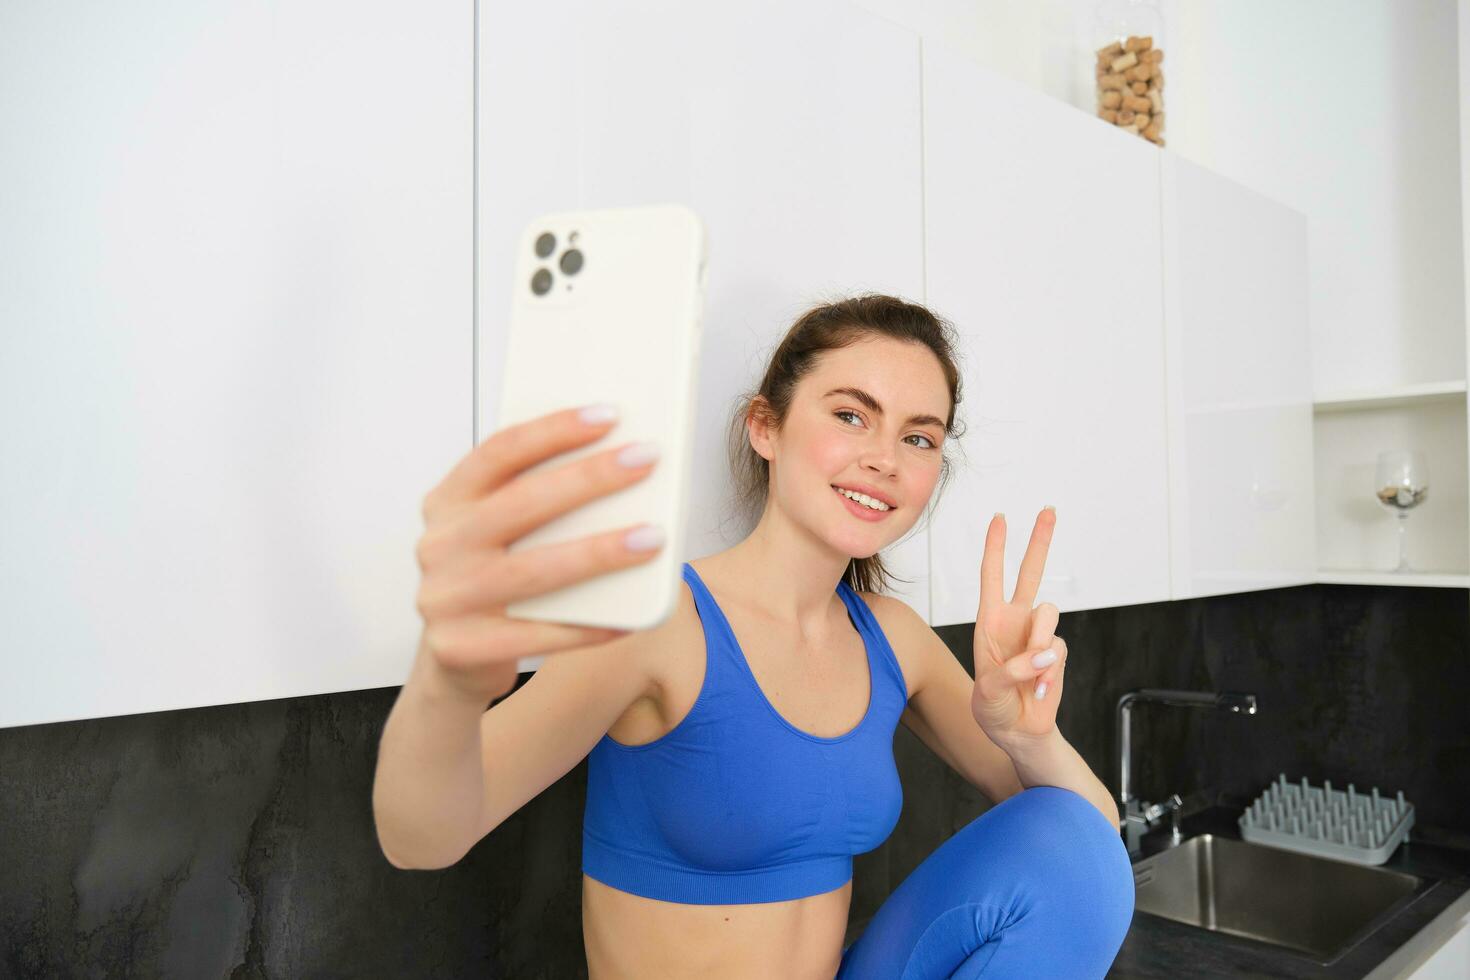 Portrait of beautiful woman, fitness blogger, taking selfie in sportsbra and leggings, posing in kitchen with smartphone photo